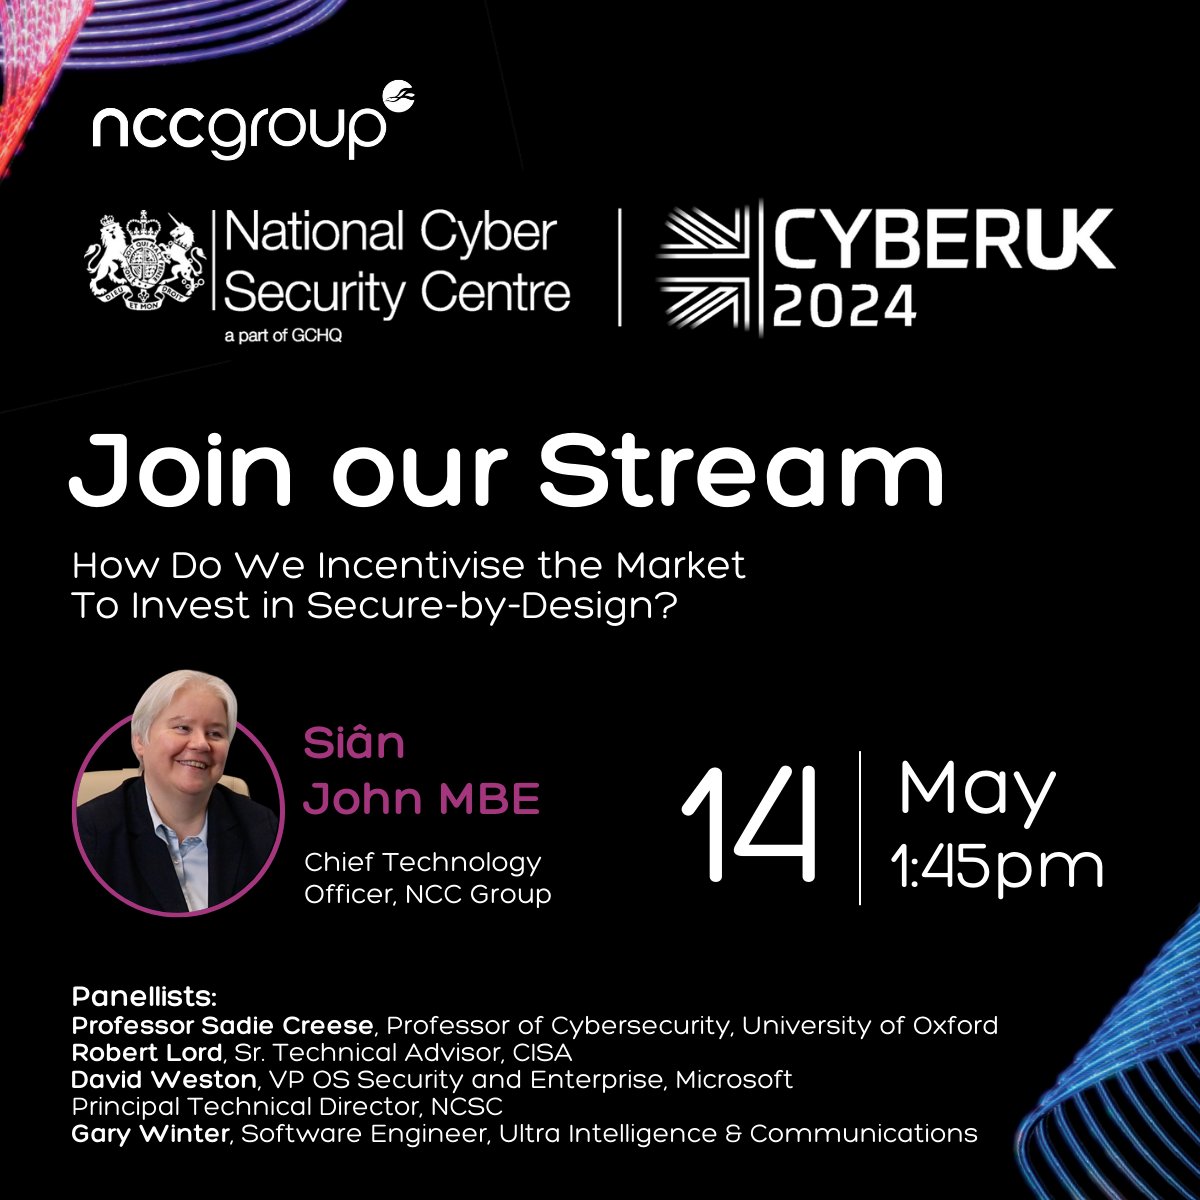 Our CTO, Sian John MBE, has been confirmed as a panellist on Day 1 of CYBERUK – “How Do We Incentivise the Market To Invest in Secure-by-Design?”. Learn more about NCC Group’s sponsorship of @NCSC's #CYBERUK 2024 here: bit.ly/cyberUK24